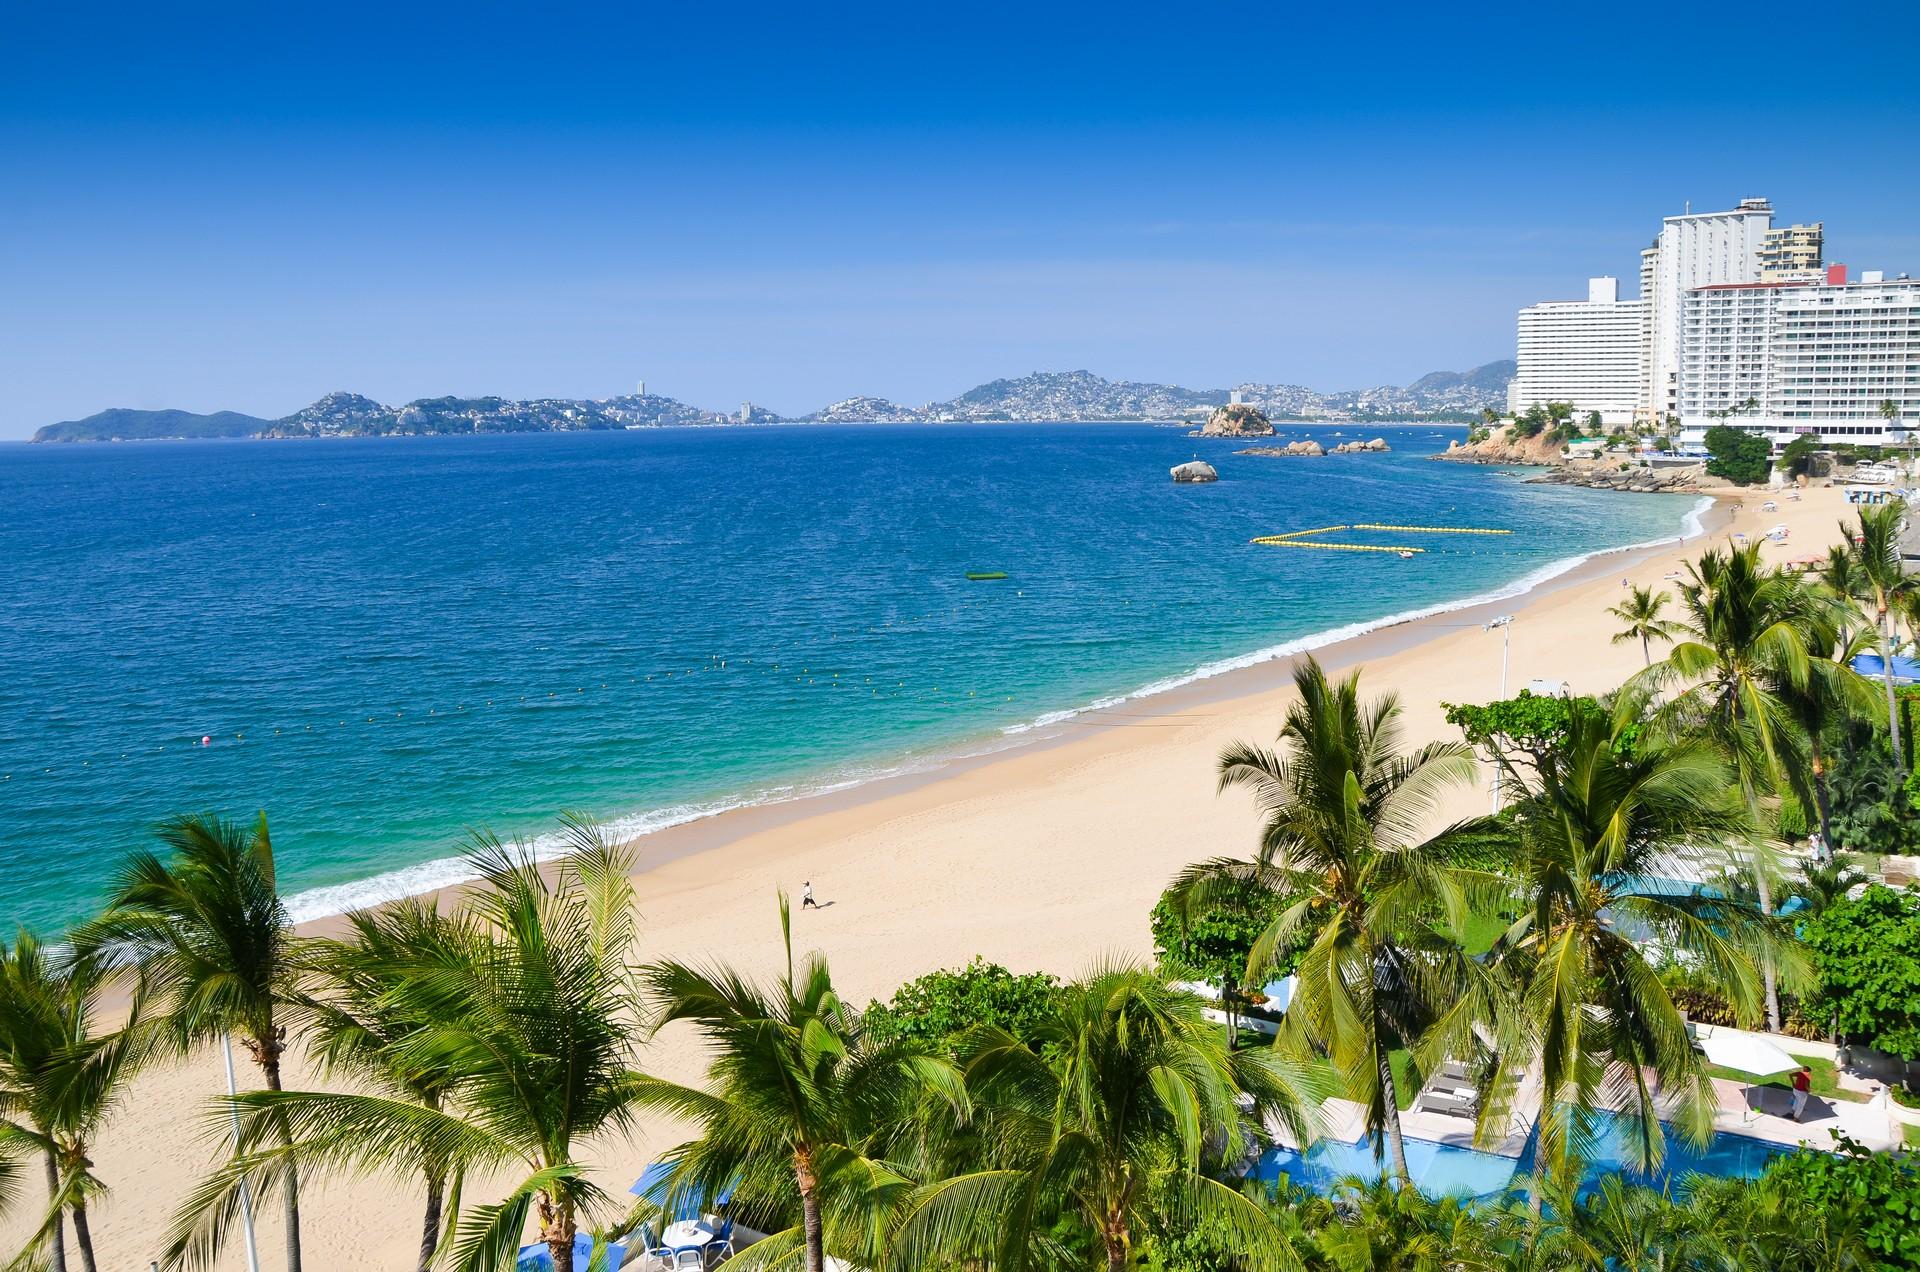 Enjoyable beach in Acapulco with nice weather and blue sky